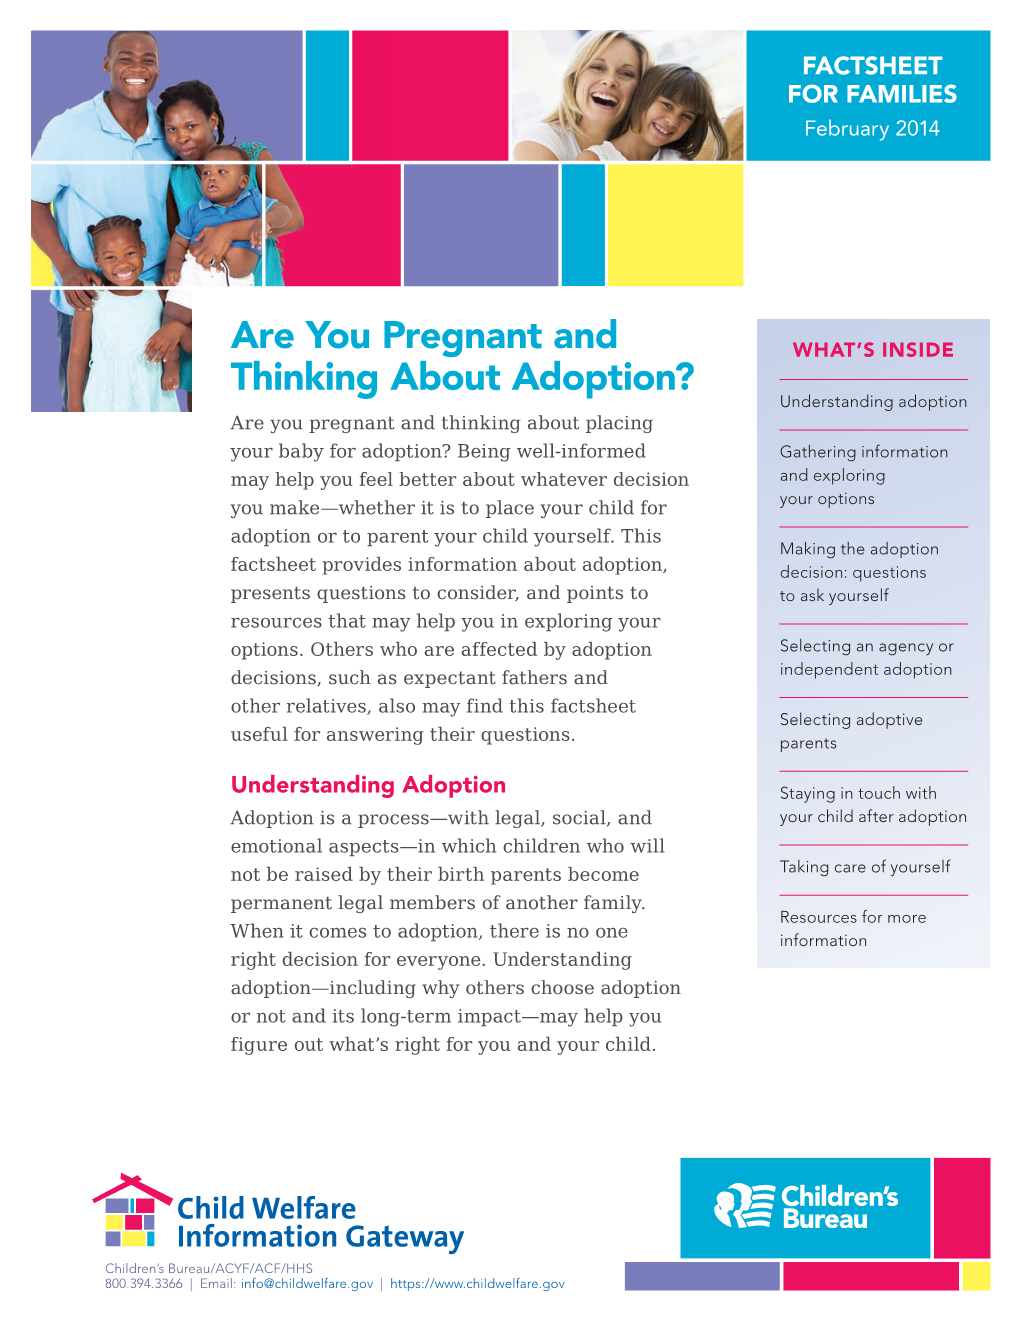 Are You Pregnant and Thinking About Adoption?